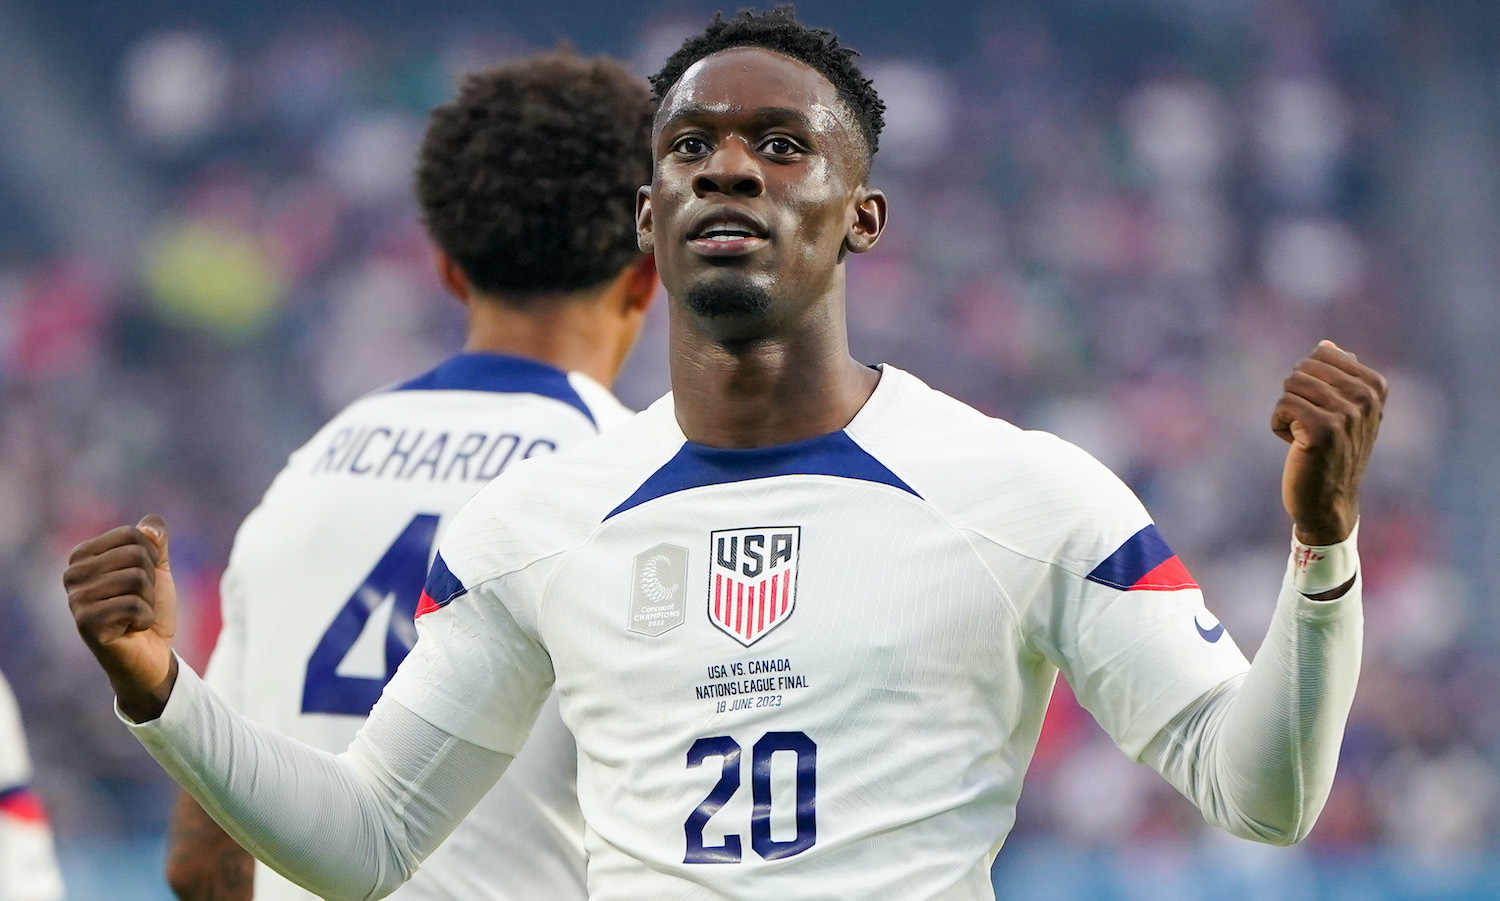 LAS VEGAS, NEVADA - JUNE 18: Folarin Balogun #20 of the United States celebrates scoring during the first half of the 2023 CONCACAF Nations League Final against Canada at Allegiant Stadium on June 18, 2023 in Las Vegas, Nevada. (Photo by John Todd/USSF/Getty Images for USSF)